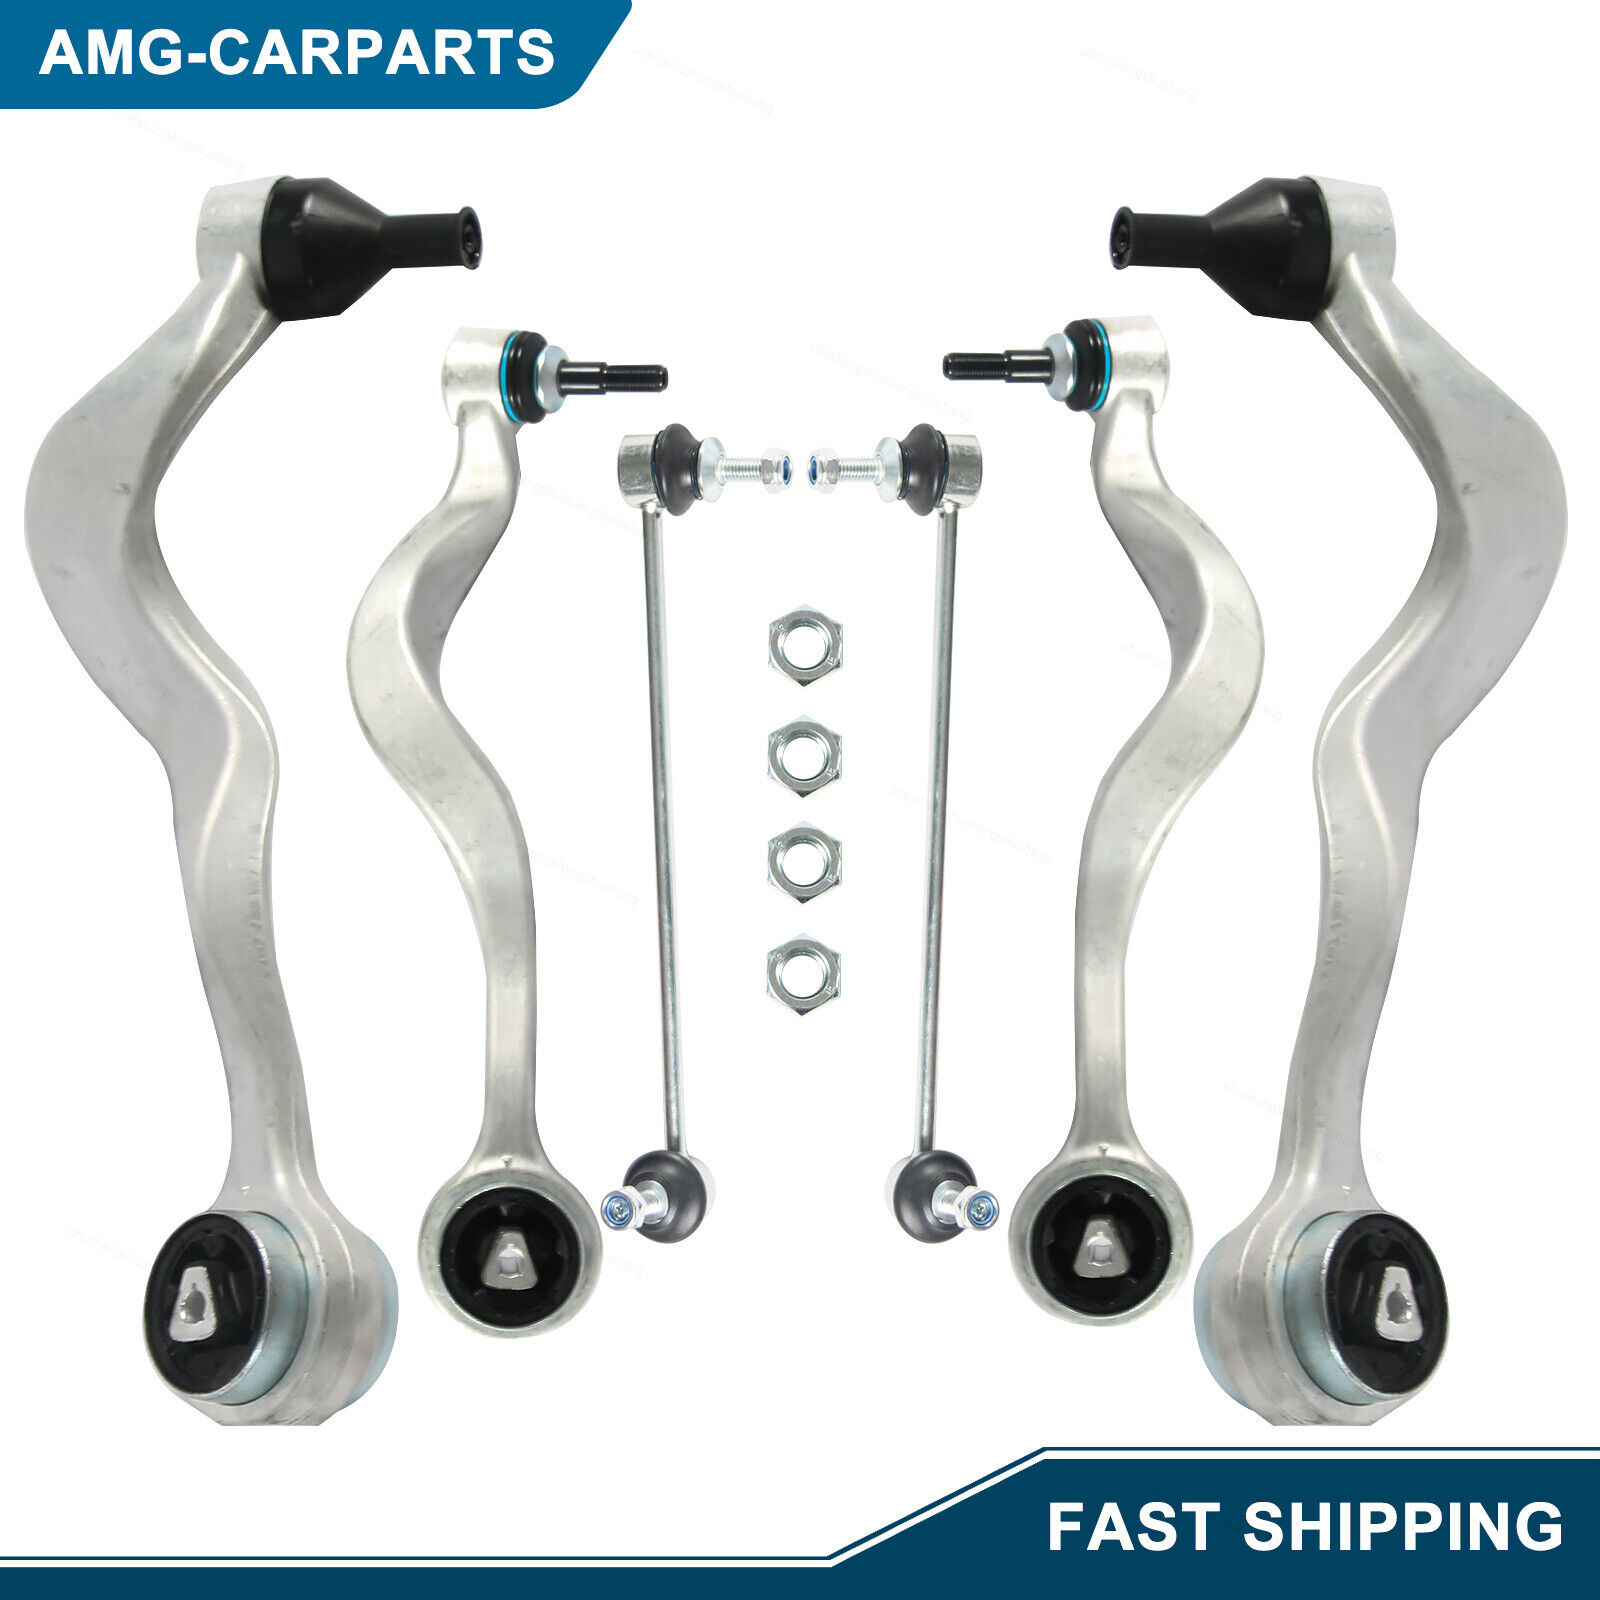 6Pcs Front Lower Forward & Rearward Control Arms Kit for BMW 5 M5 E60 525i 528i